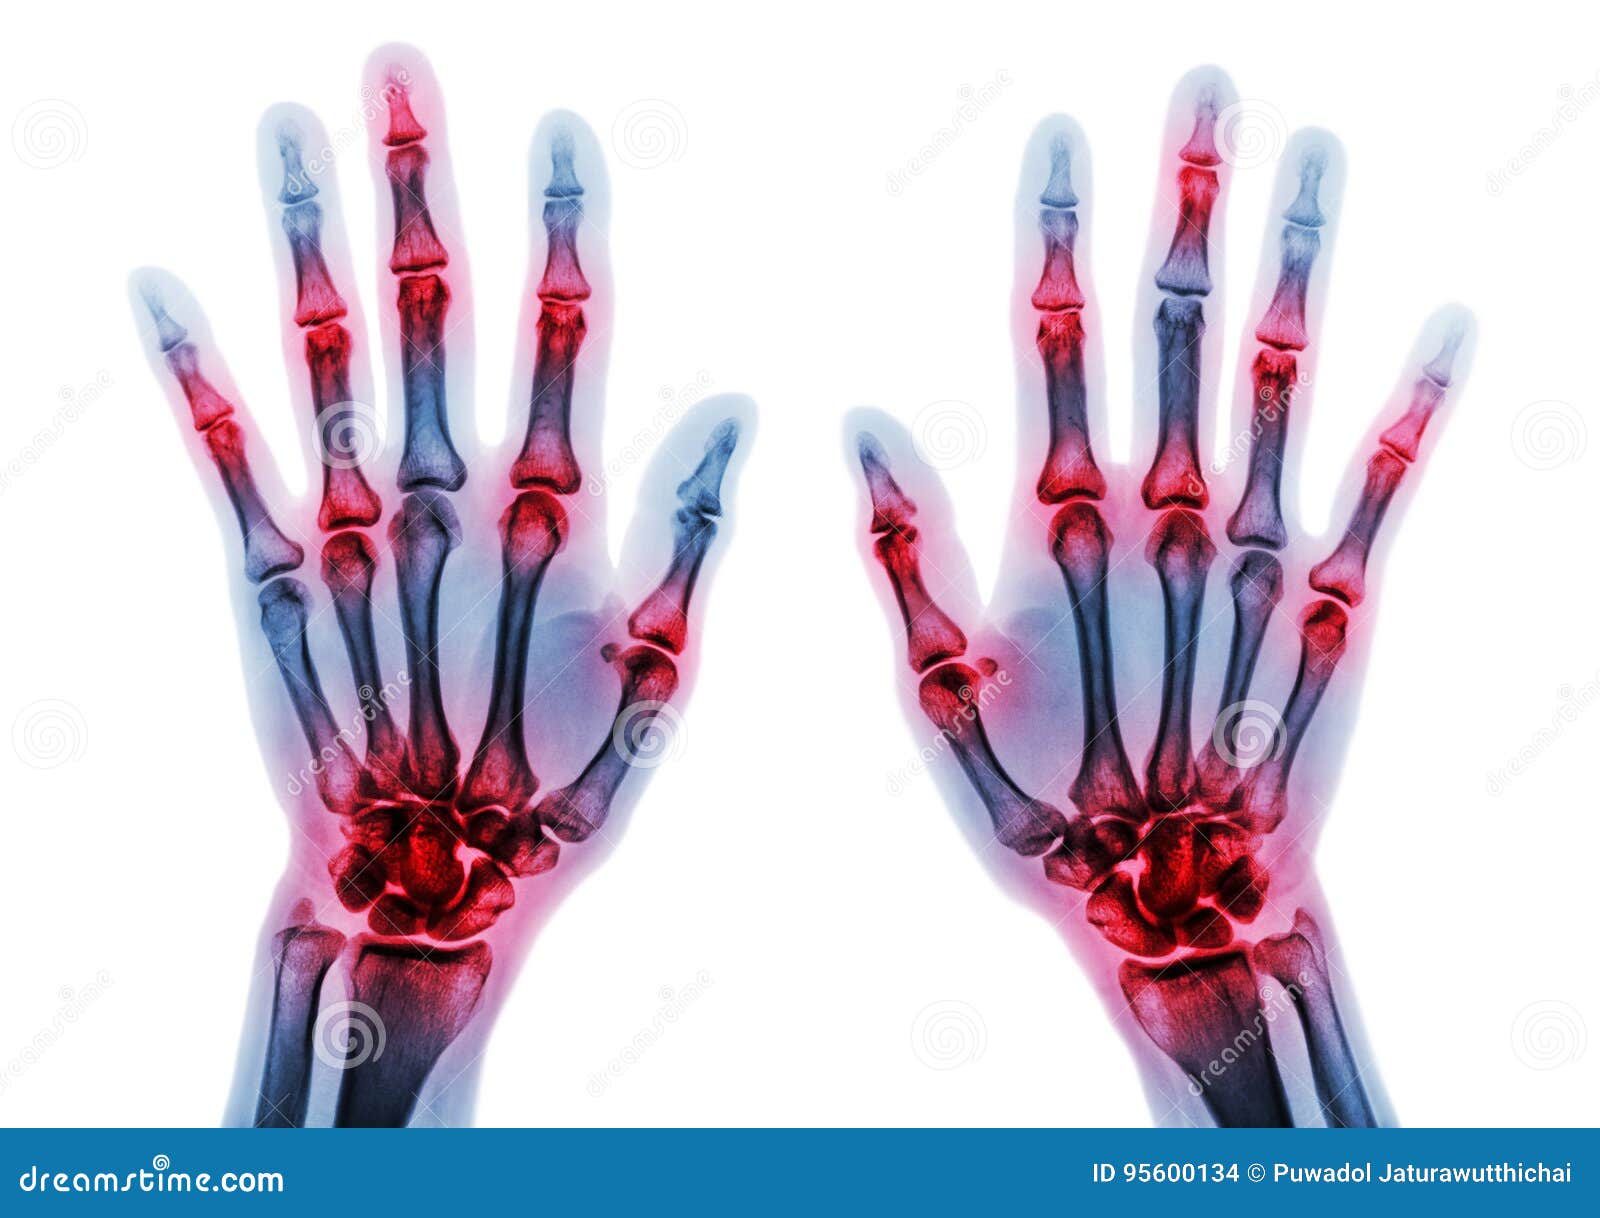 arthritis multiple joint of fingers . film x-ray of both hands and wrists